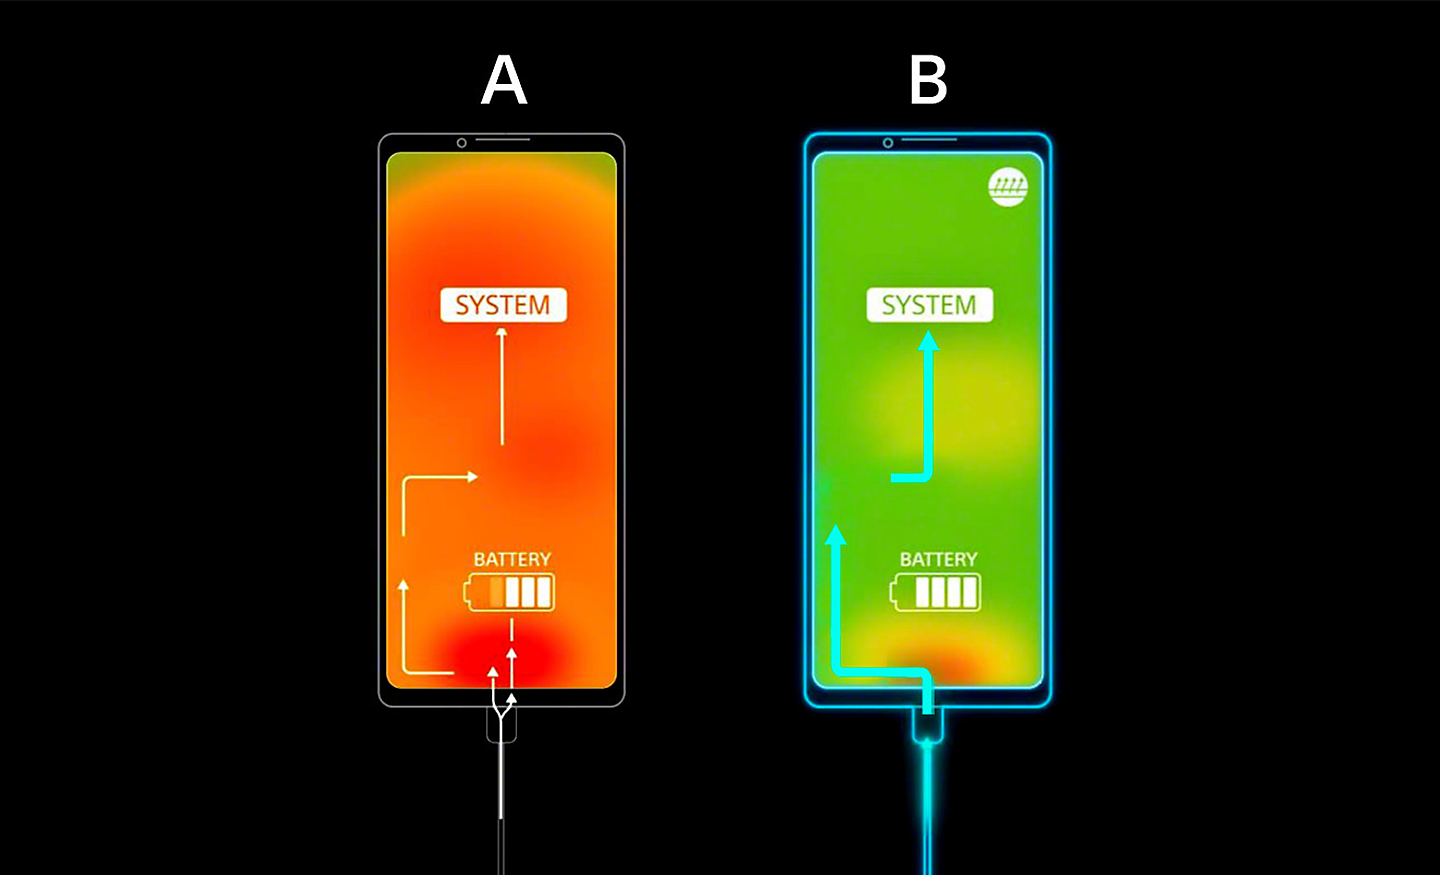 Graphic comparing two smartphones - the high temperature one is orange, the low temperature one is green